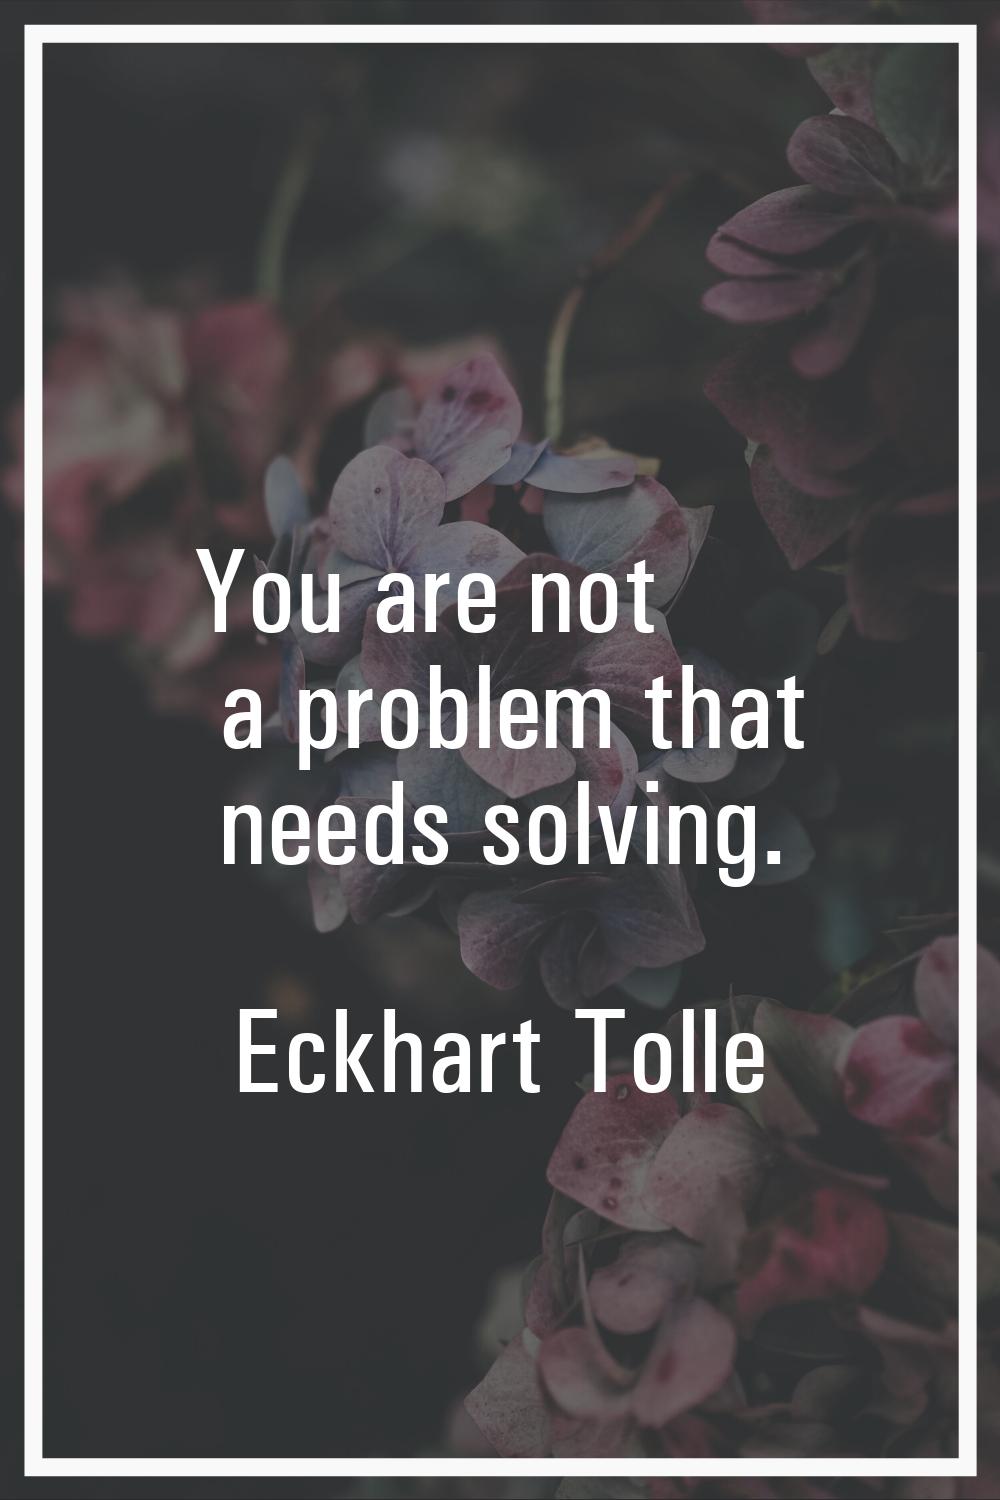 You are not a problem that needs solving.